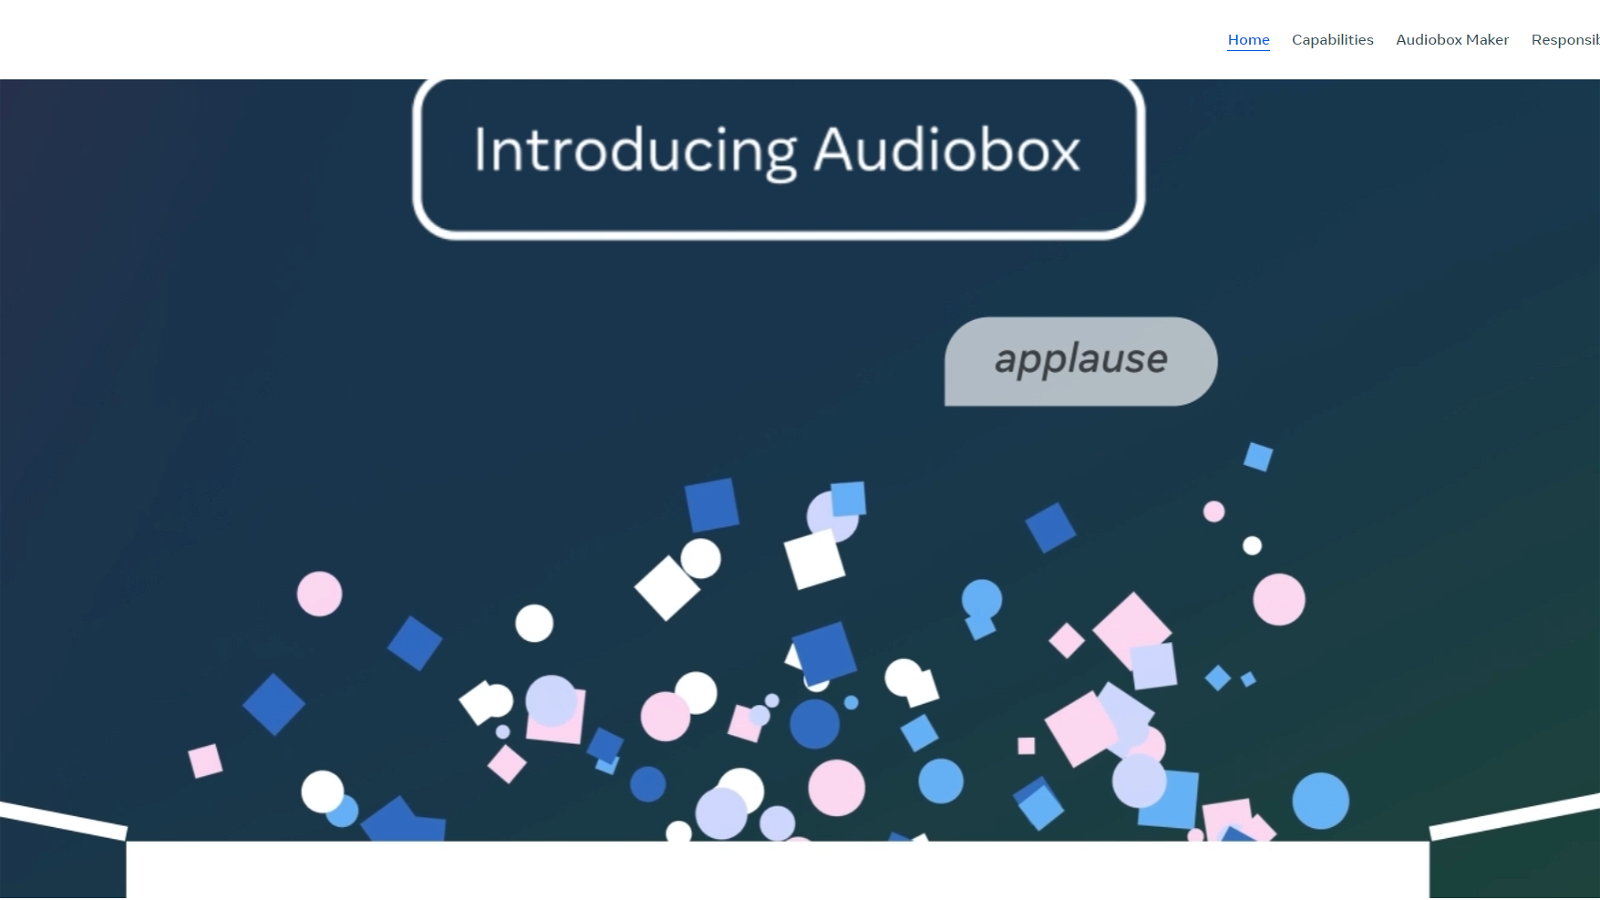 Audiobox is the new Meta AI that will be able to clone your voice in seconds